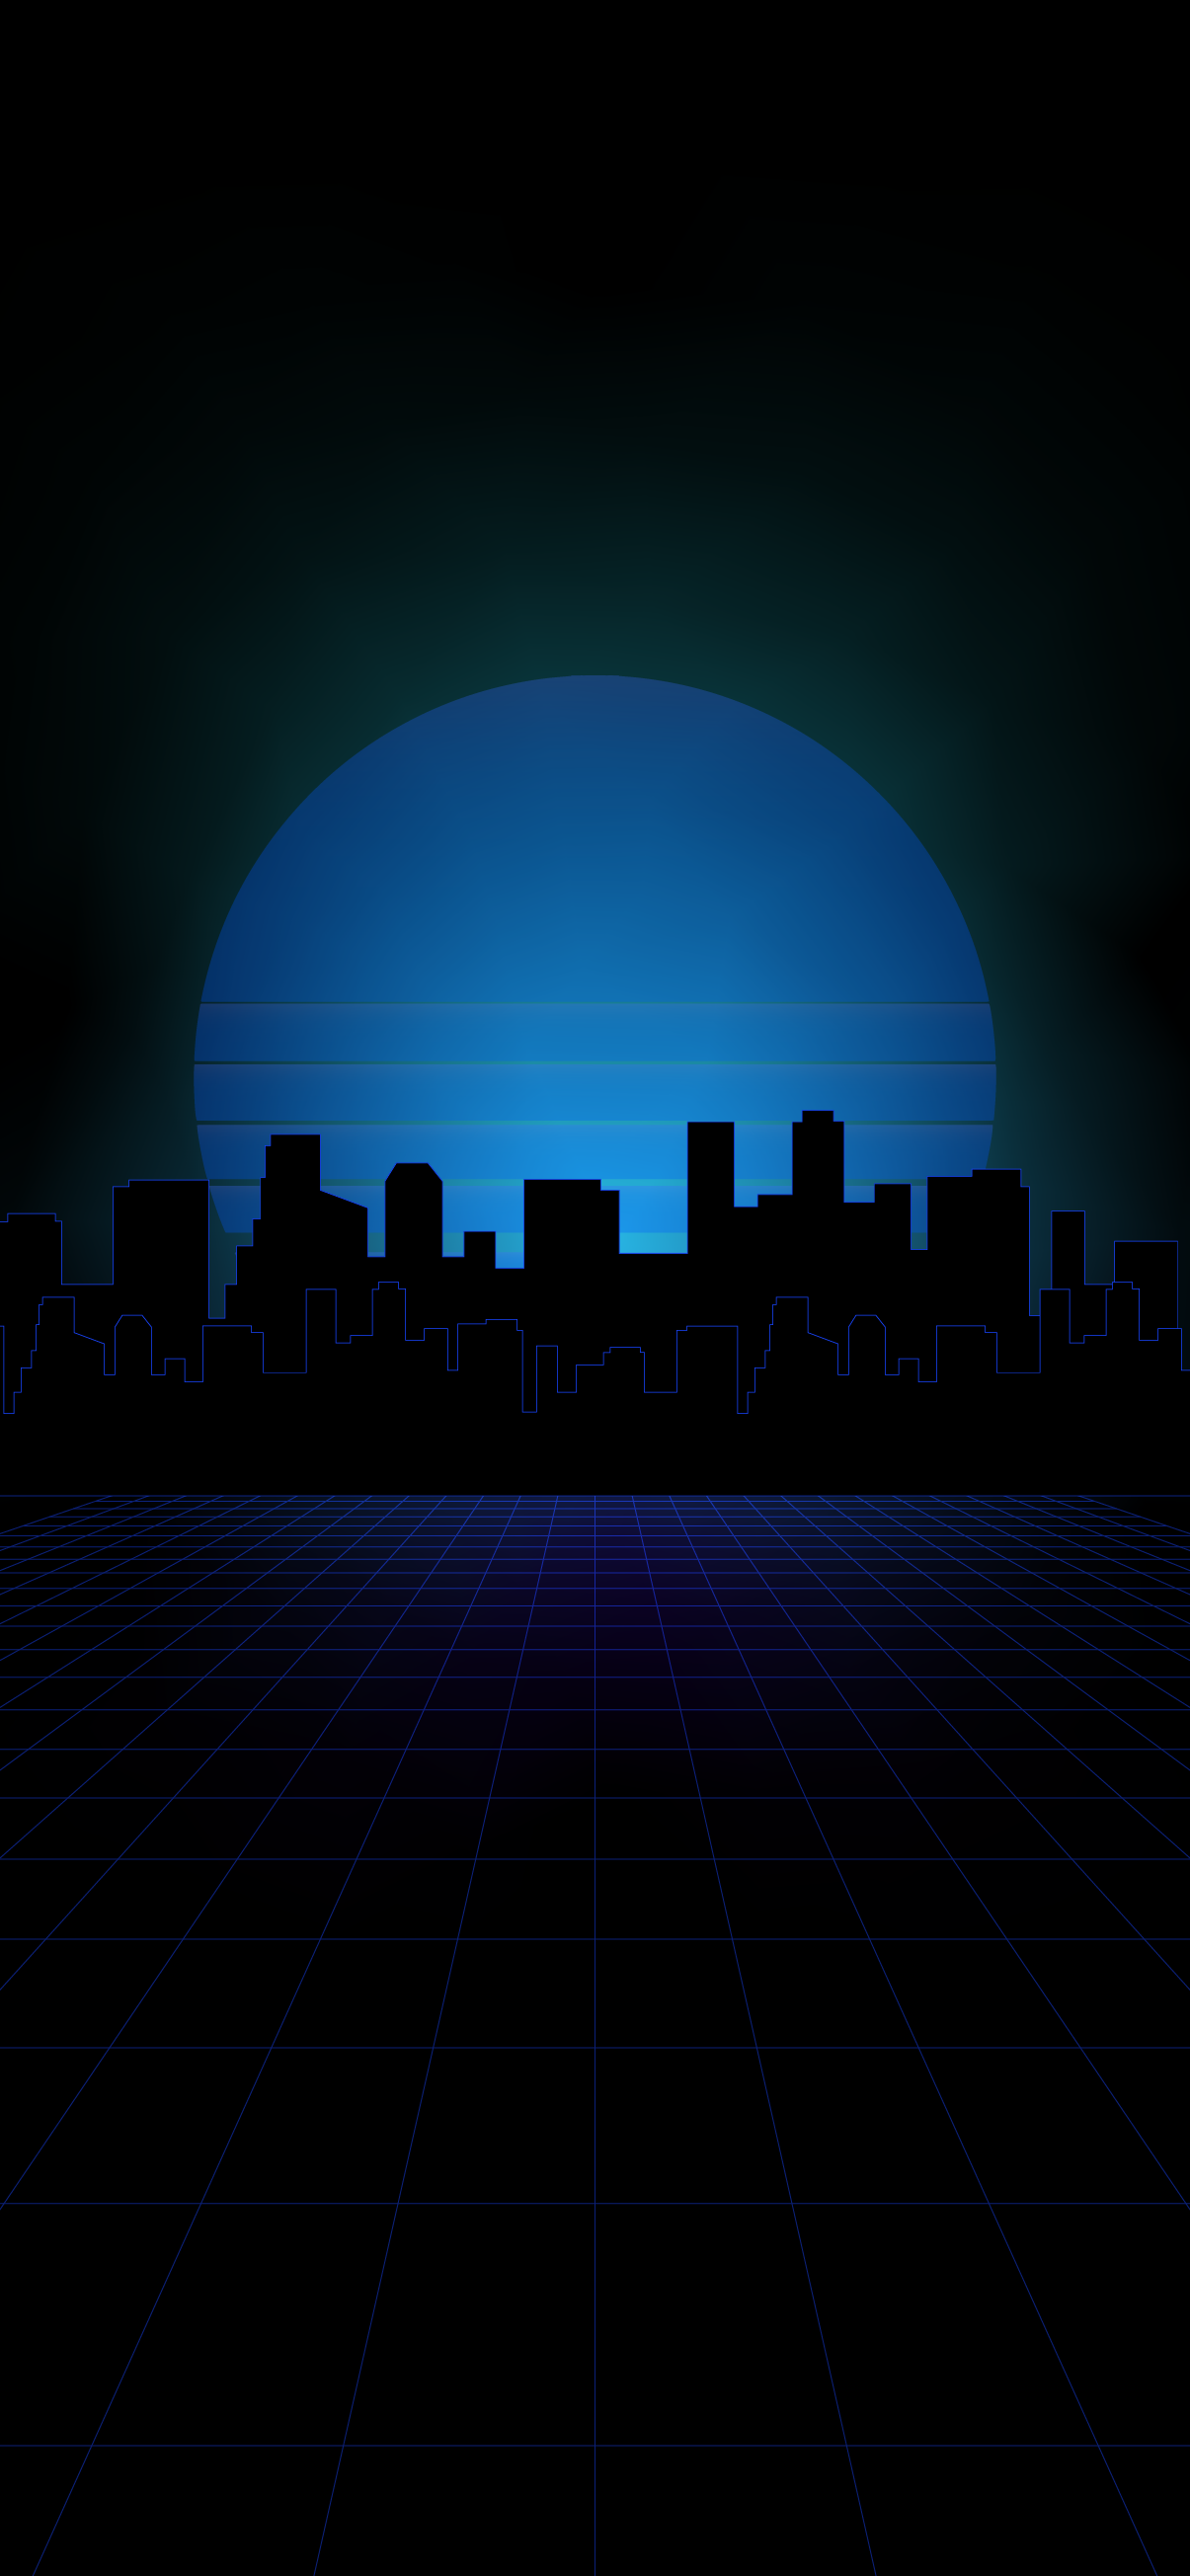 synthwave wallpaper iphone 4k